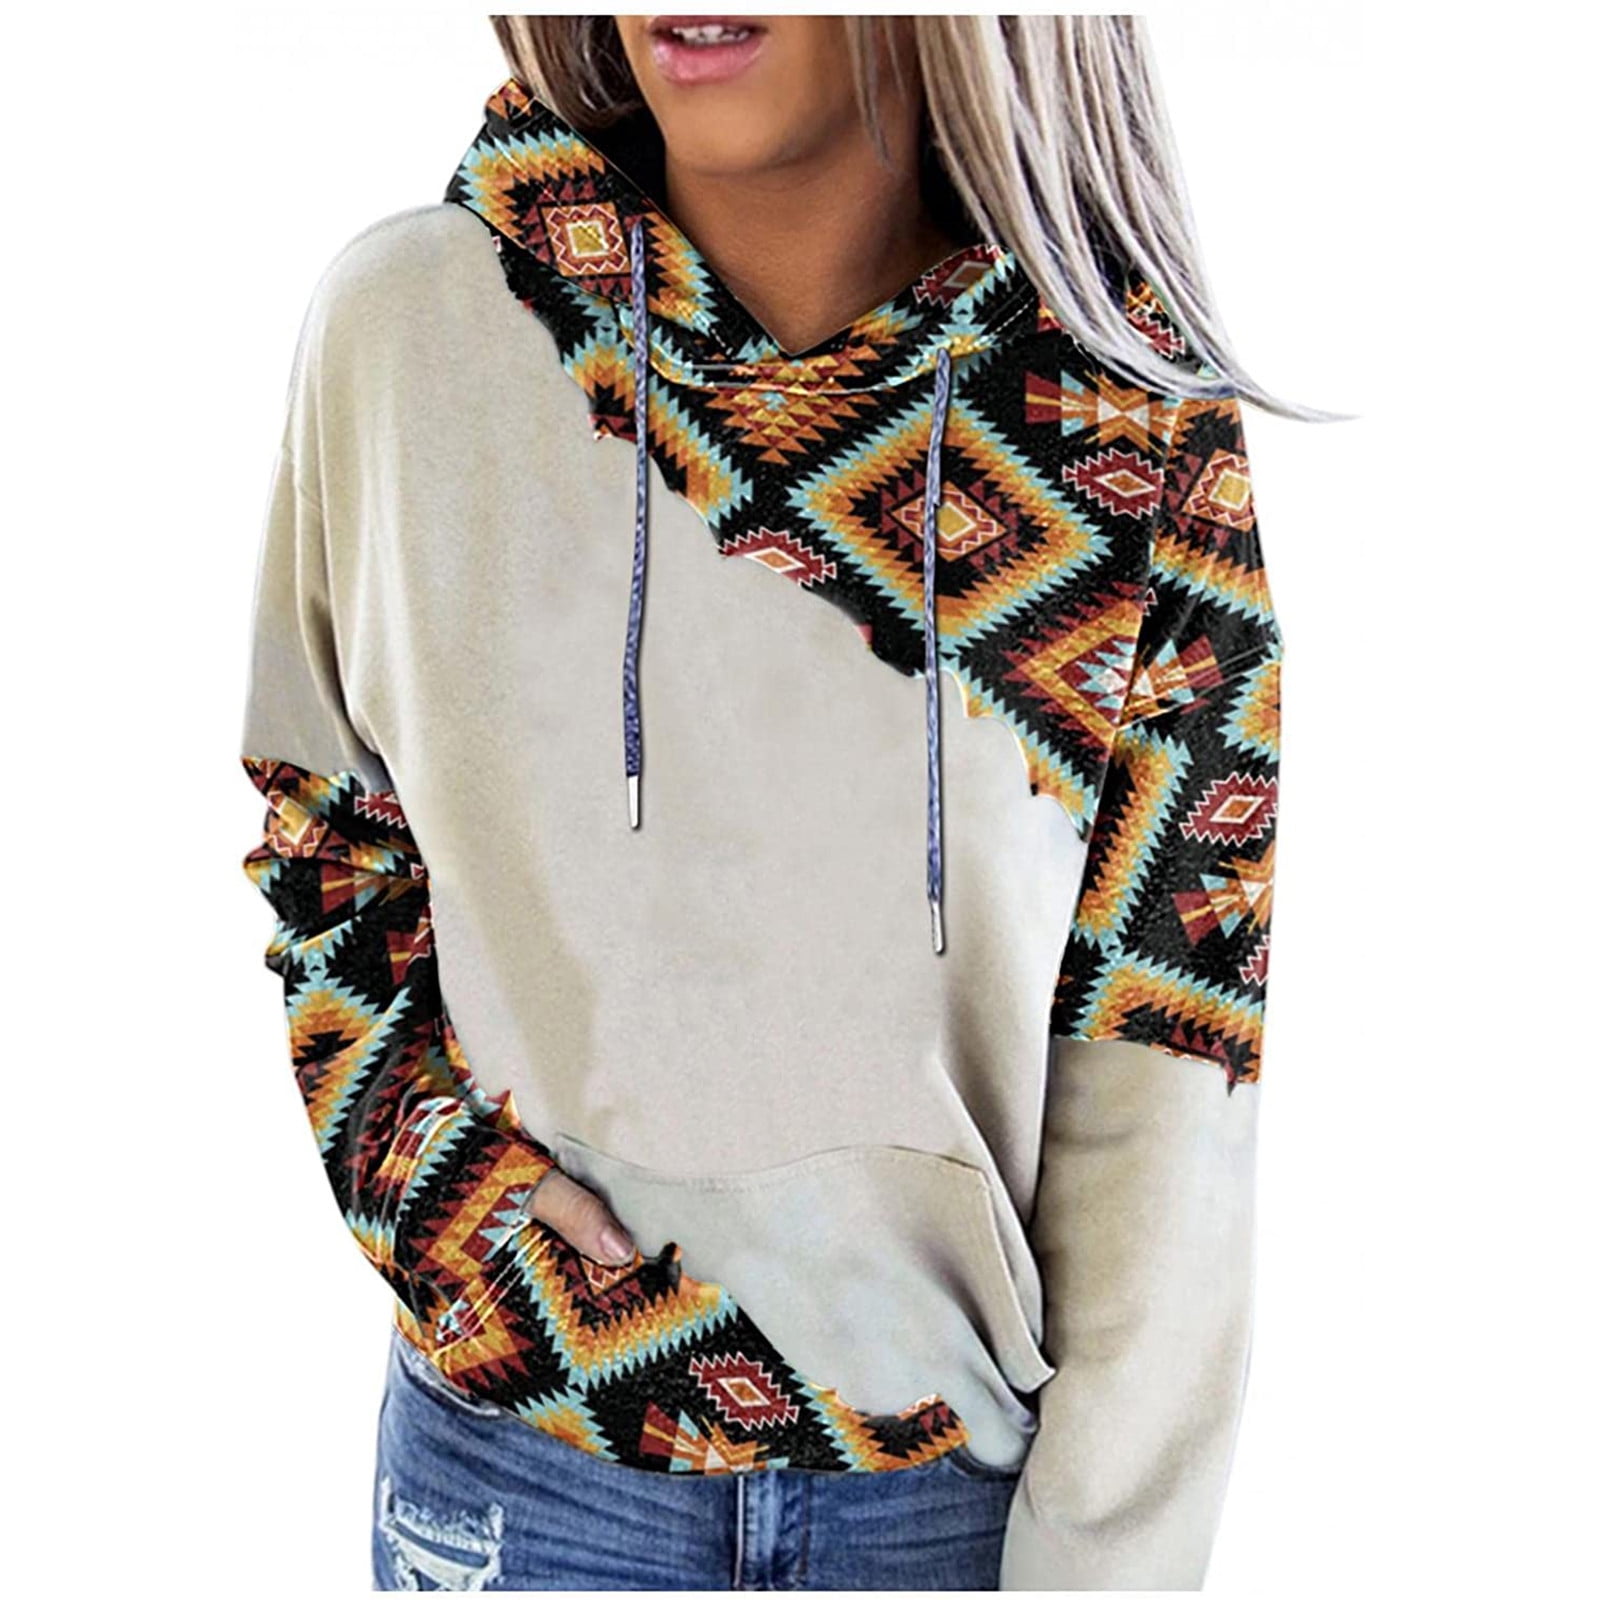 HAPIMO Rollbacks Sweatshirt for Women Pocket Drawstring Pullover Tops  Weatern Vintage Ethnic Graphic Print Long Sleeve Relaxed Fit Womens Hoodie  Stitching Sweatshirt Teen Girls Clothes Orange S 